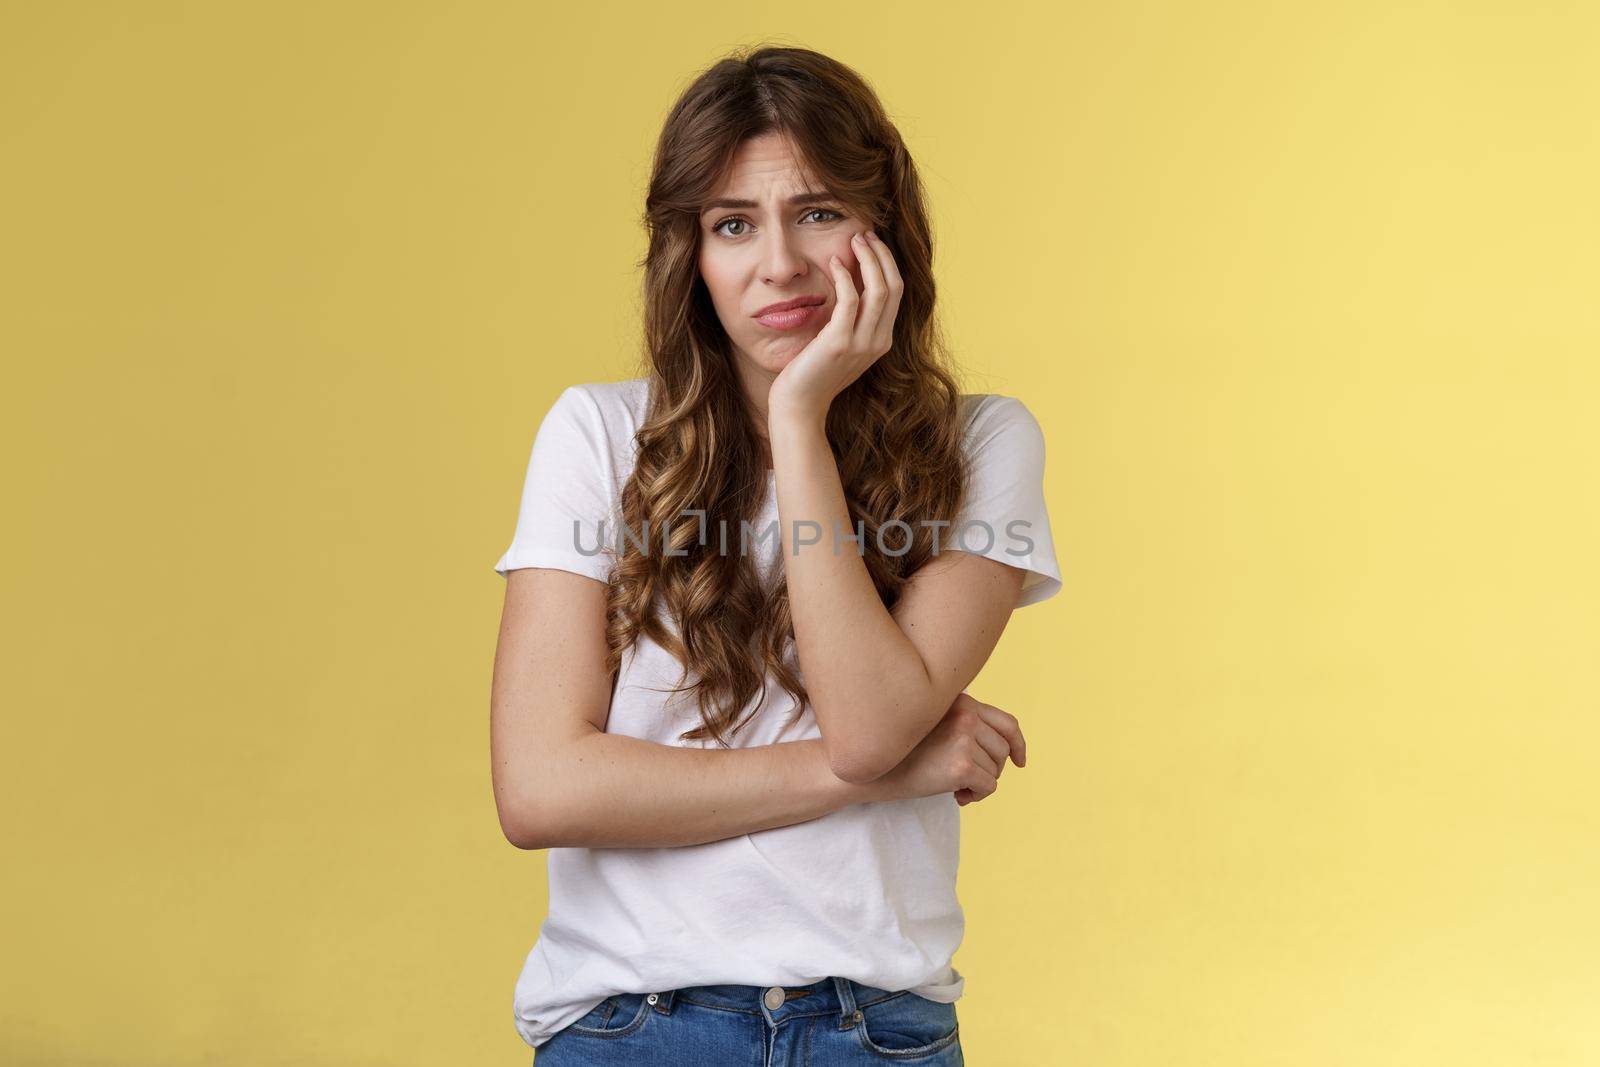 Upset distressed cute disappointed pretty girl feeling lonely regretting missed opportunity sighing sorrow sadness look camera apathetic indifferent lean face palm frowning jealous yellow background.